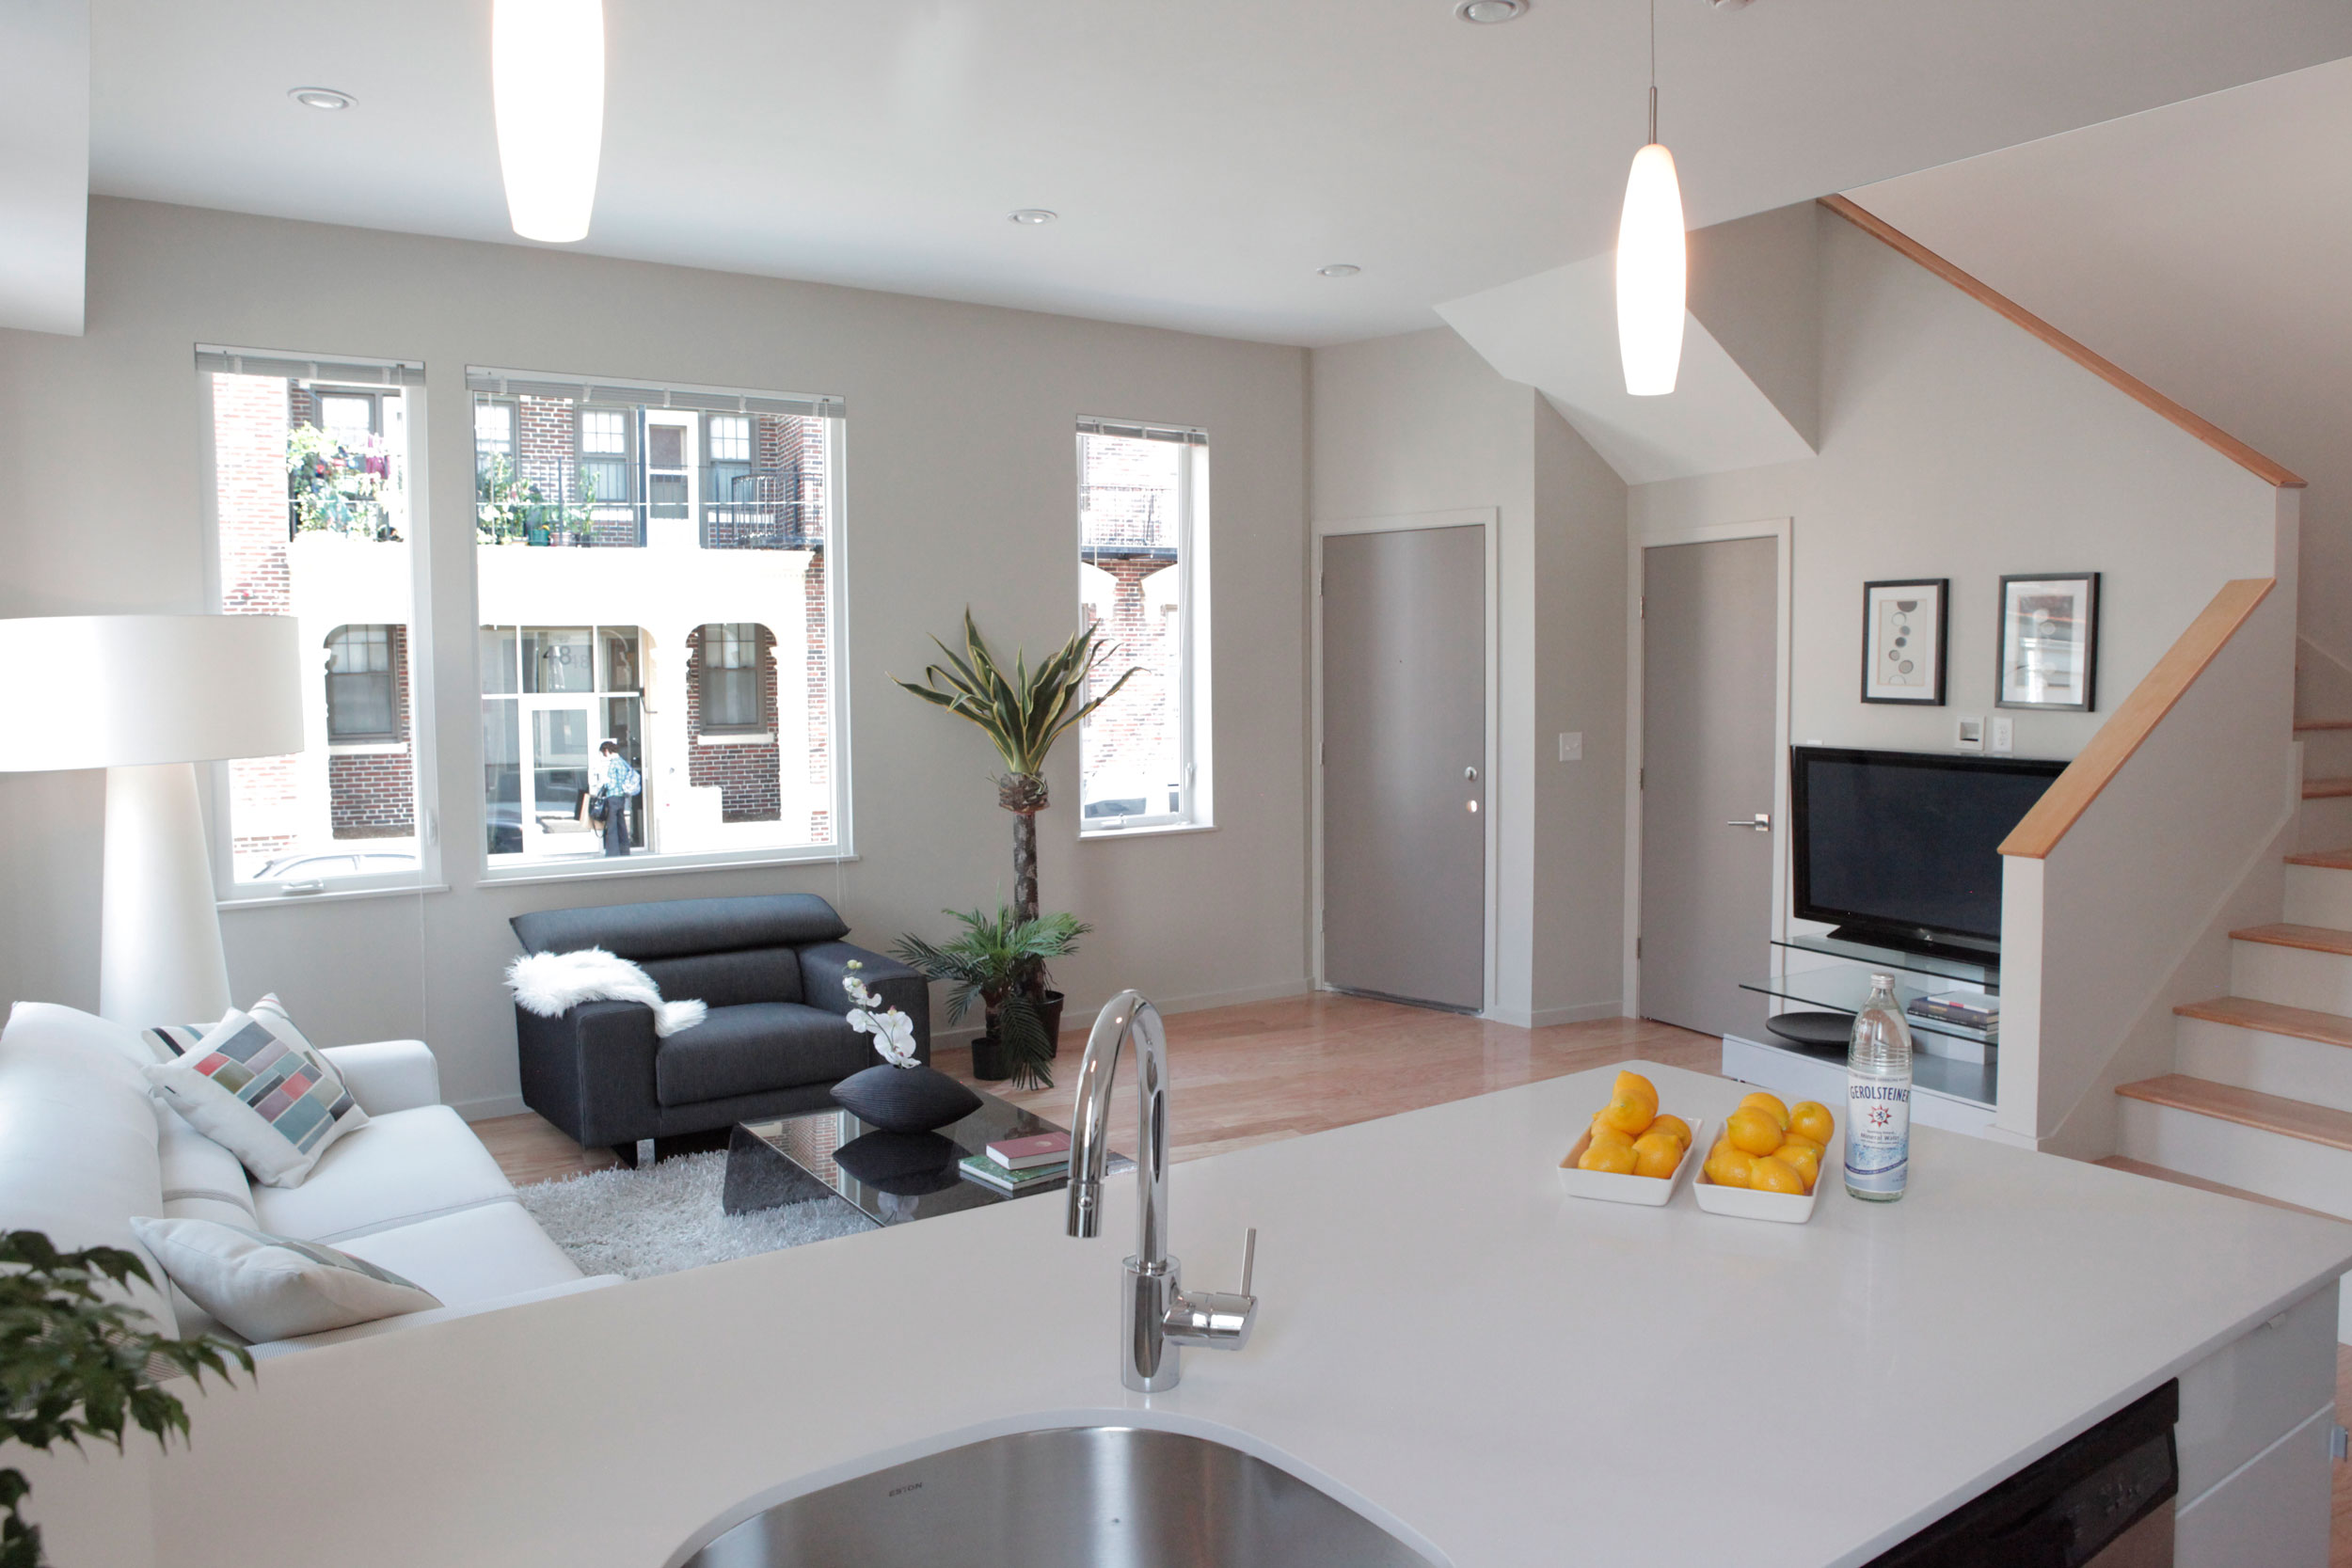 Glenville Townhomes by RODE Architects. Photo: RODE Architects.